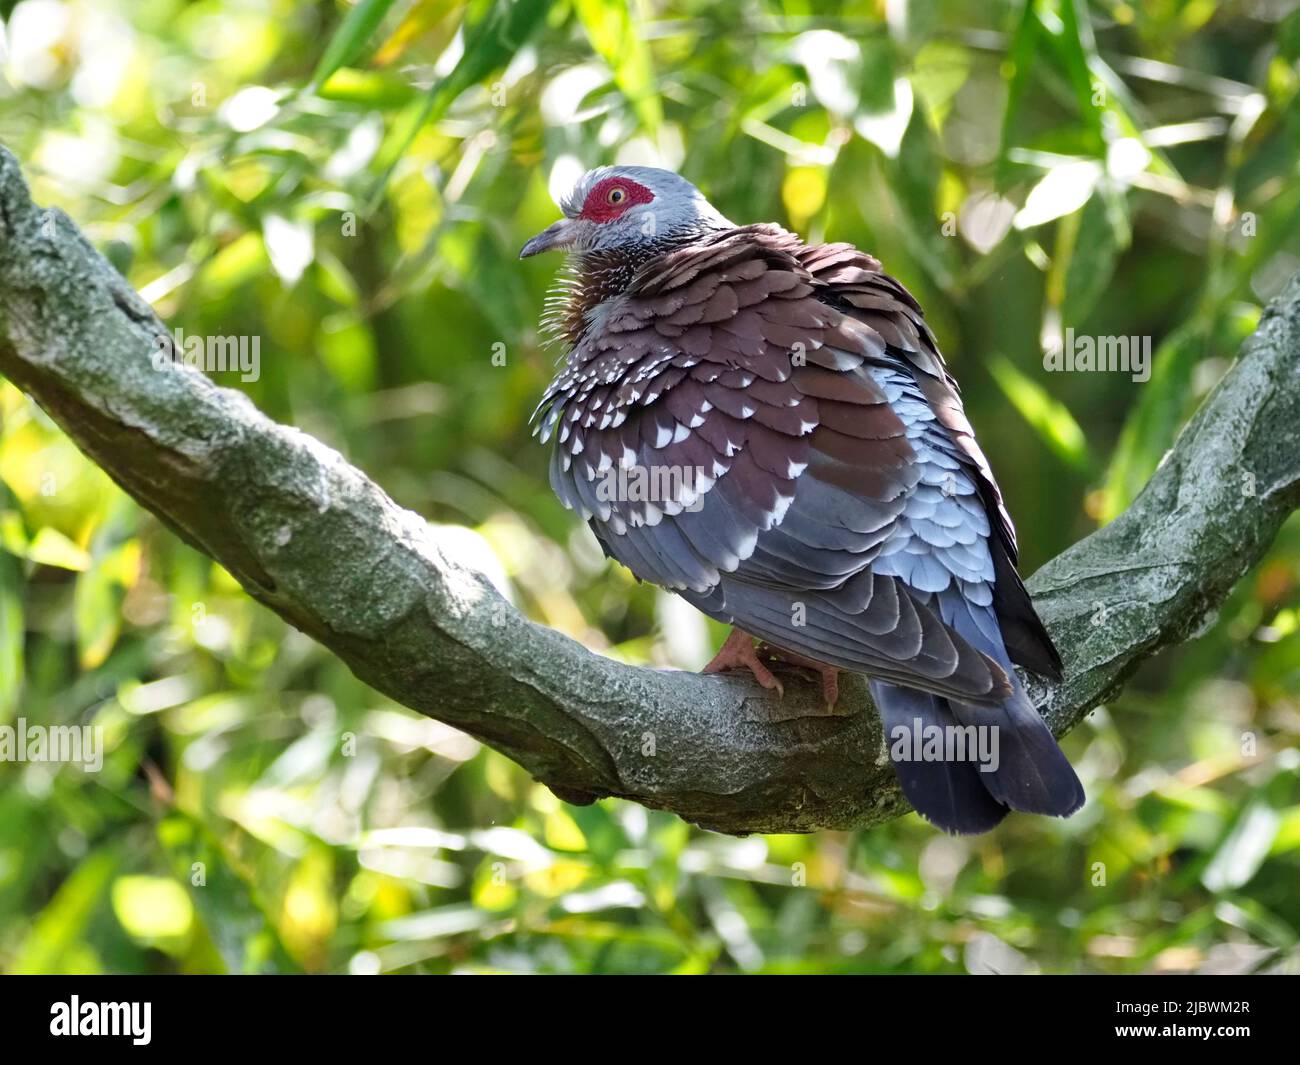 Closeup speckled pigeon (Columba guinea), or African rock pigeon perched on branch and seen from behind Stock Photo